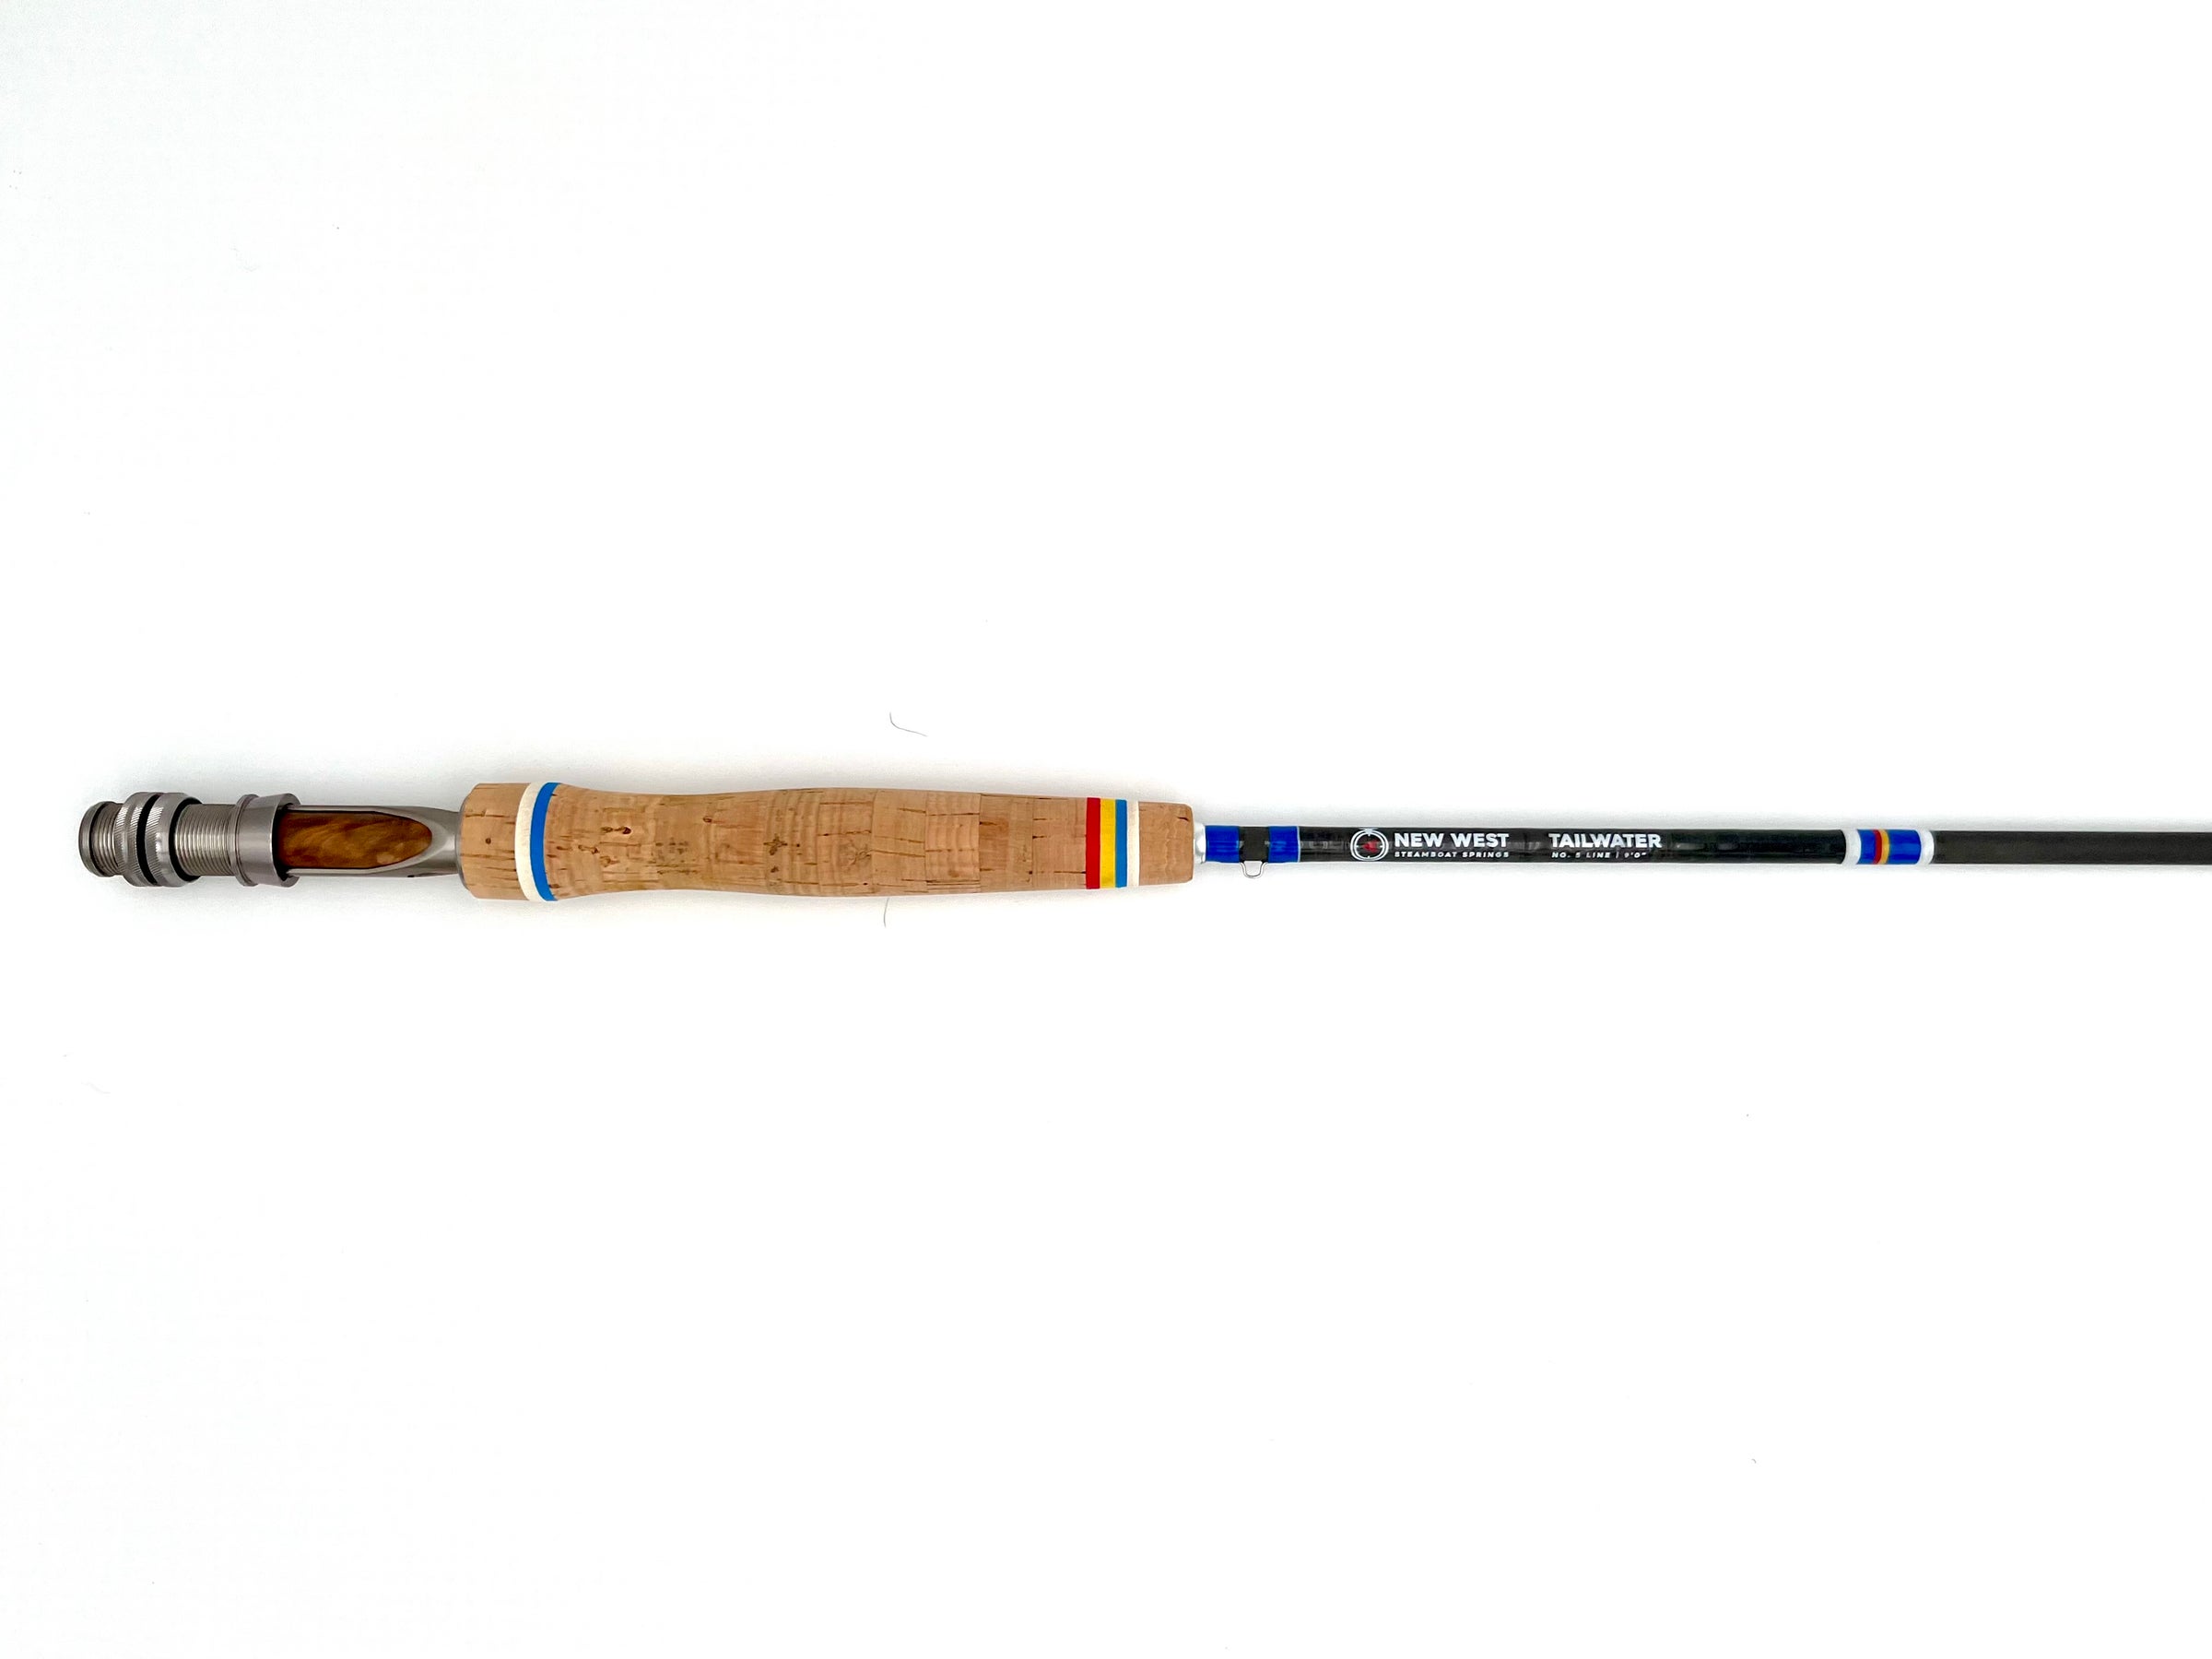 Quality Fly Fishing Rods for Sale, Handmade Fly Fishing Rods